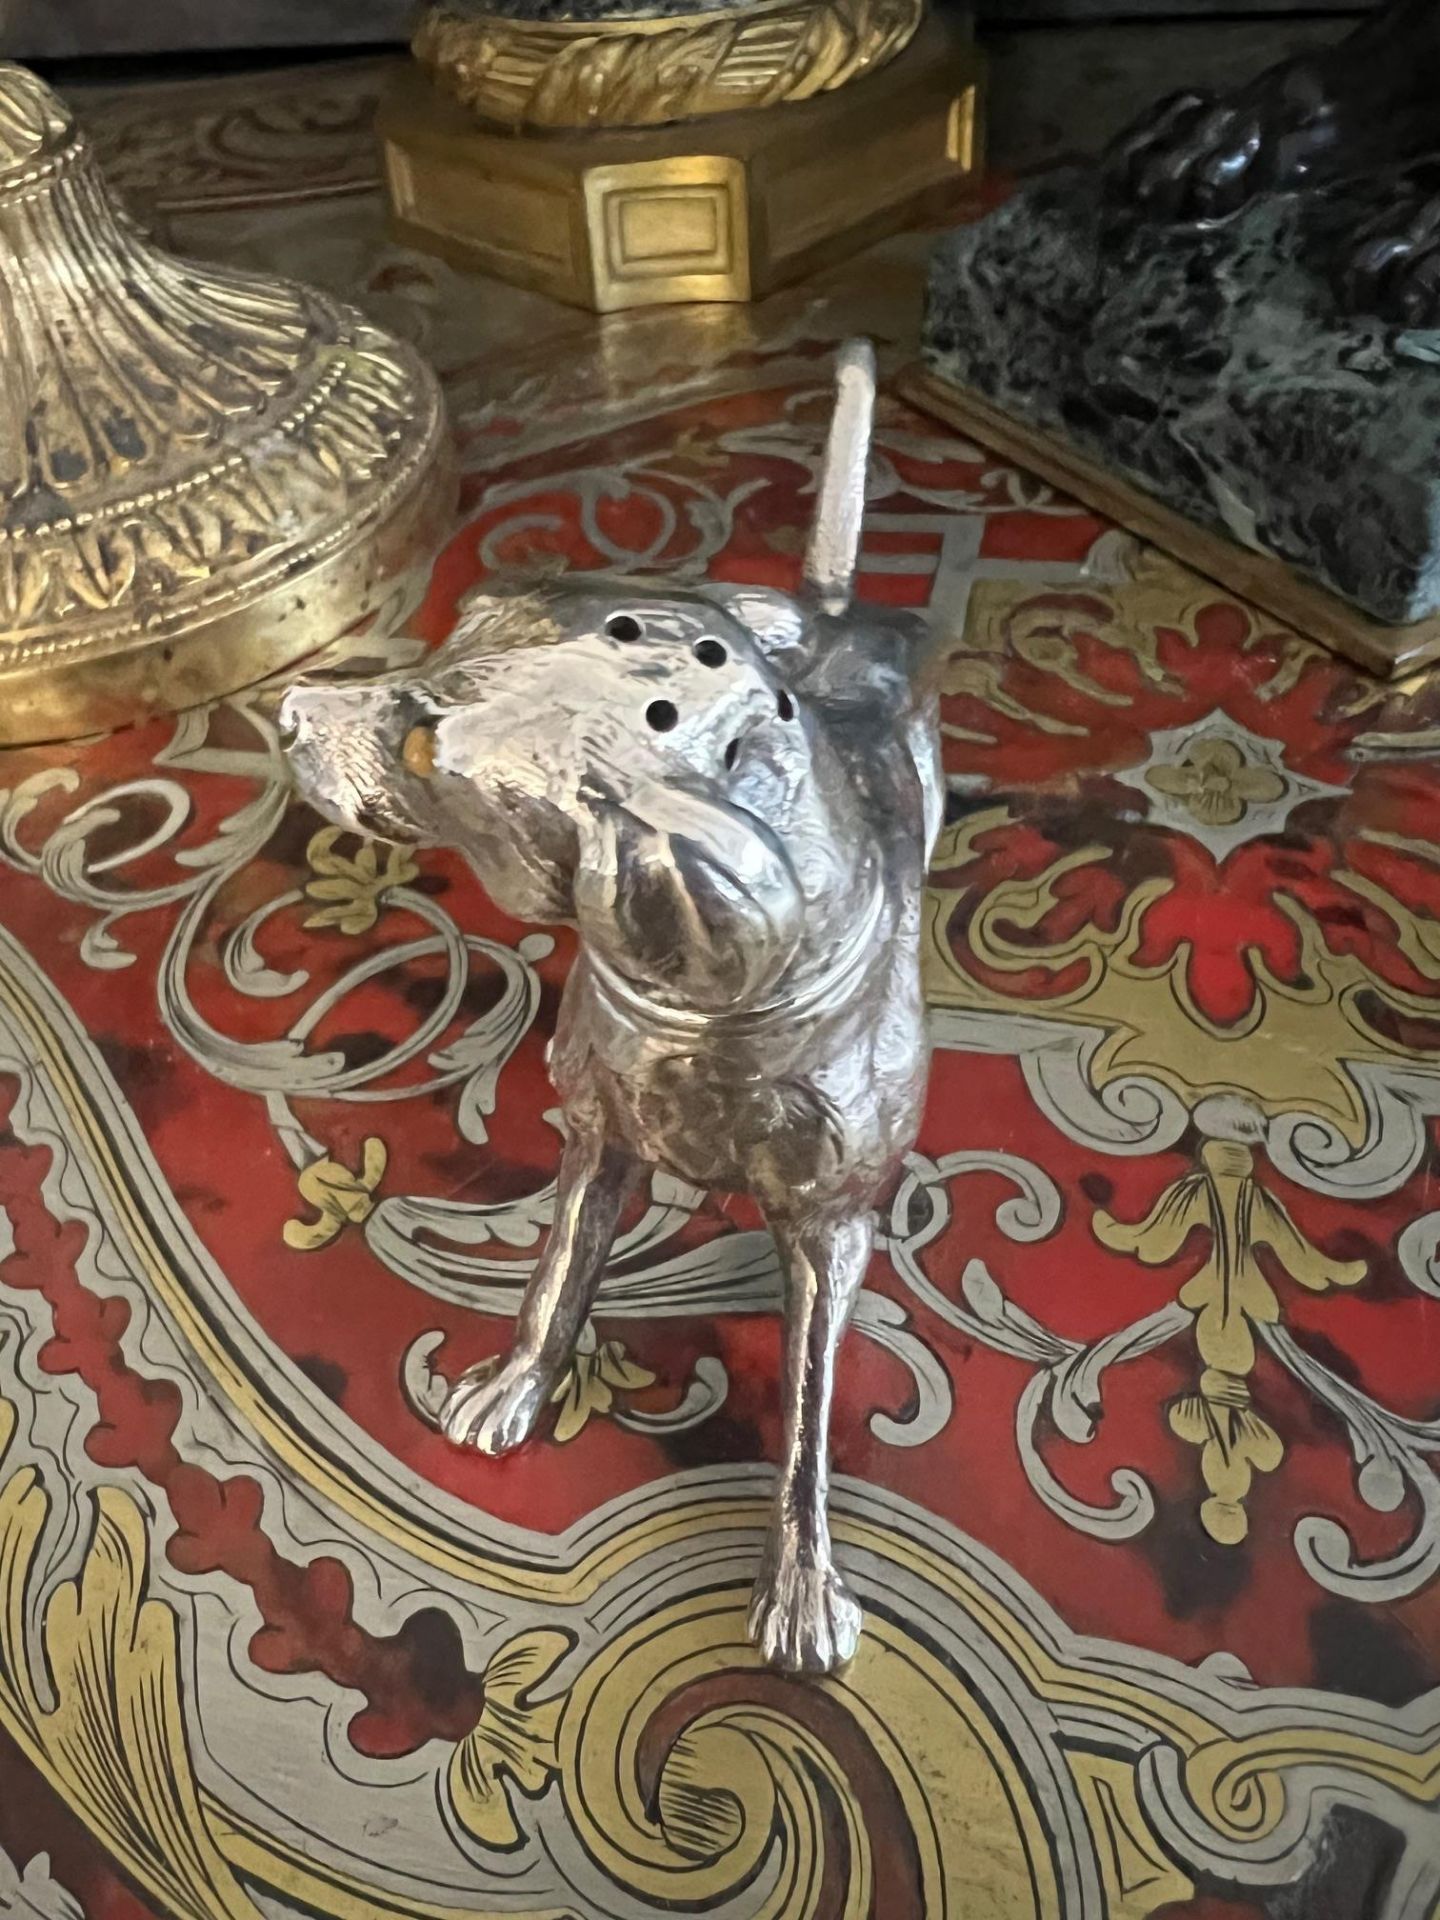 AN EARLY 20TH CENTURY STERLING SILVER DOG PEPPER SHAKER BY ELKINGTON & CO. 1913 - Image 5 of 8